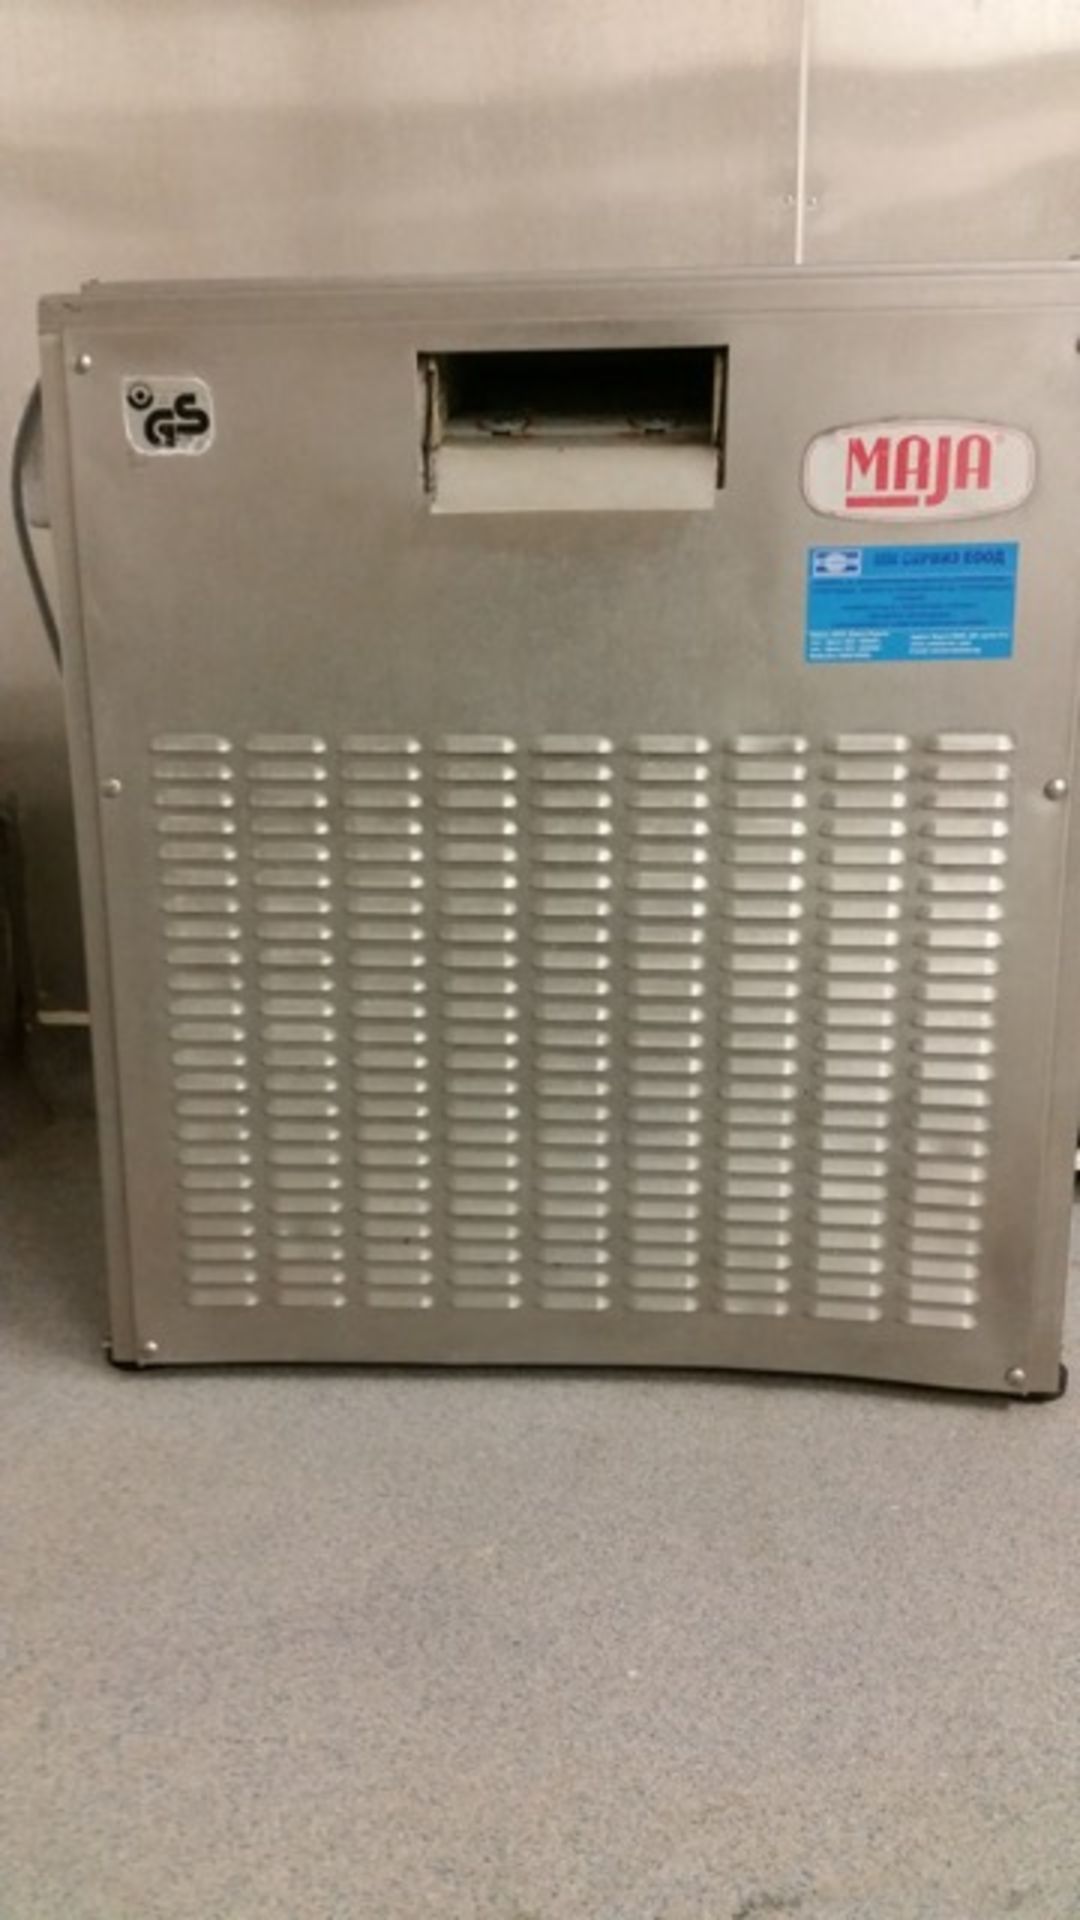 Maja Ice machine. Approx. 300 kilo per hour. Totally S/s lift out £25